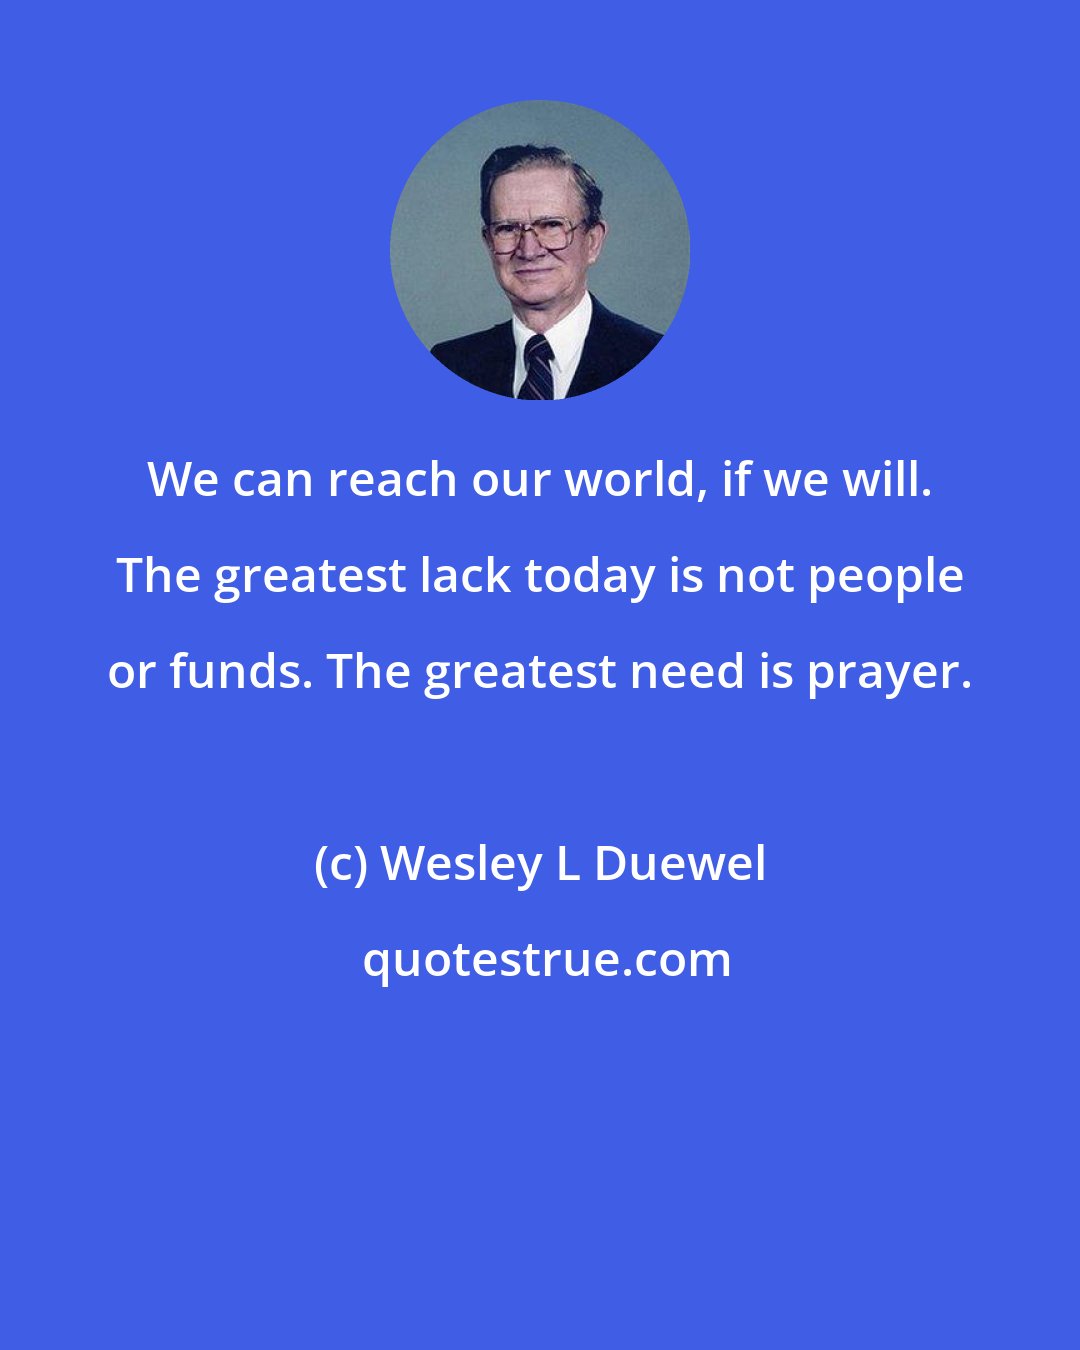 Wesley L Duewel: We can reach our world, if we will. The greatest lack today is not people or funds. The greatest need is prayer.